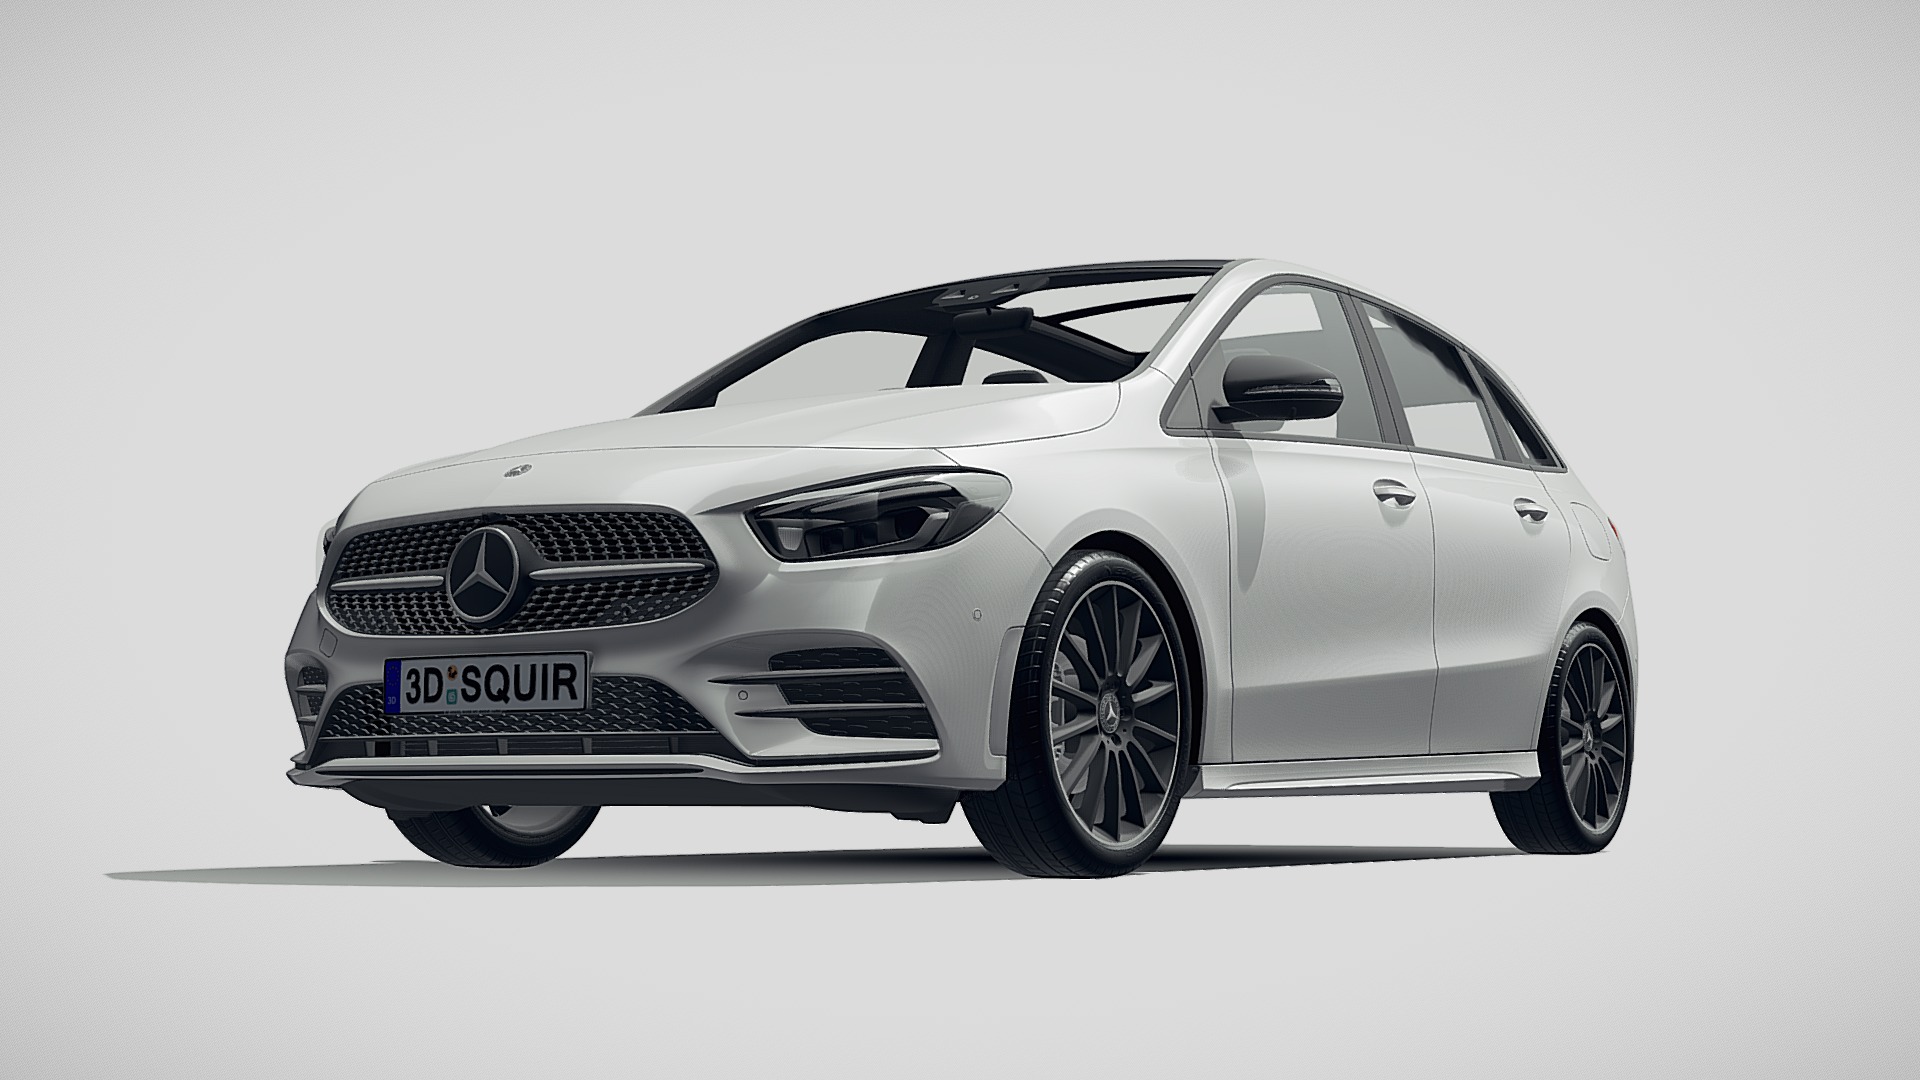 3D model Mercedes Benz B-class AMG 2019 - This is a 3D model of the Mercedes Benz B-class AMG 2019. The 3D model is about a white car with a black roof.